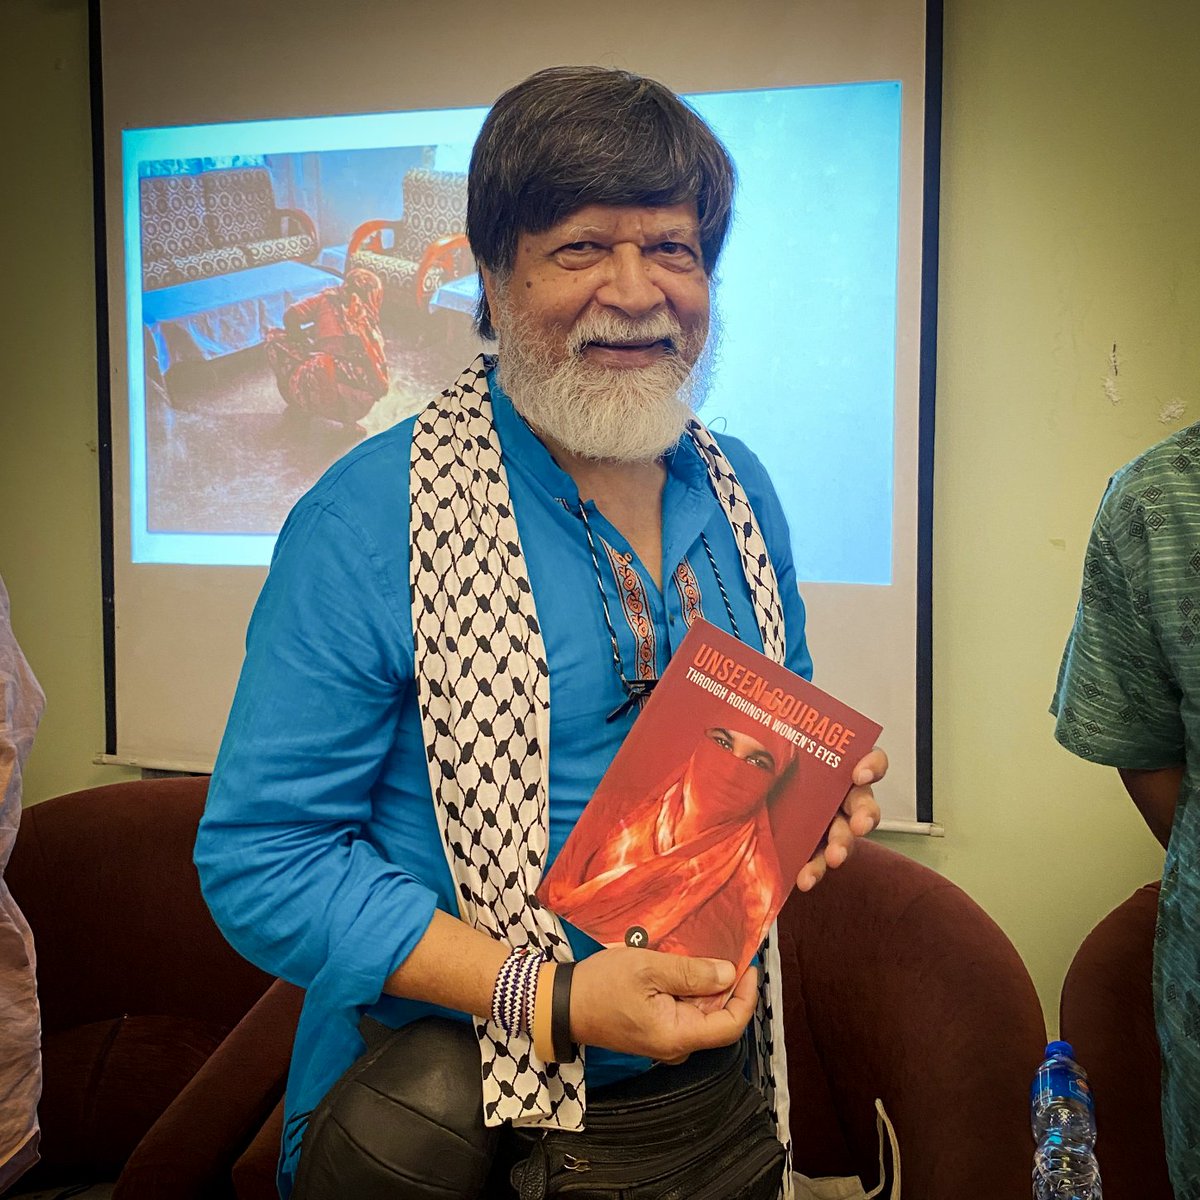 @shahidul with a copy of our photobook 'Unseen Courage' at @AUW_Chittagong curated by @chit_Ishrat and published by @RohingyaMakzin with support from @SEAJunction and @ziahero backed by his @princeclausfund Get your copy in our shop: rohingyatographer.org/shop